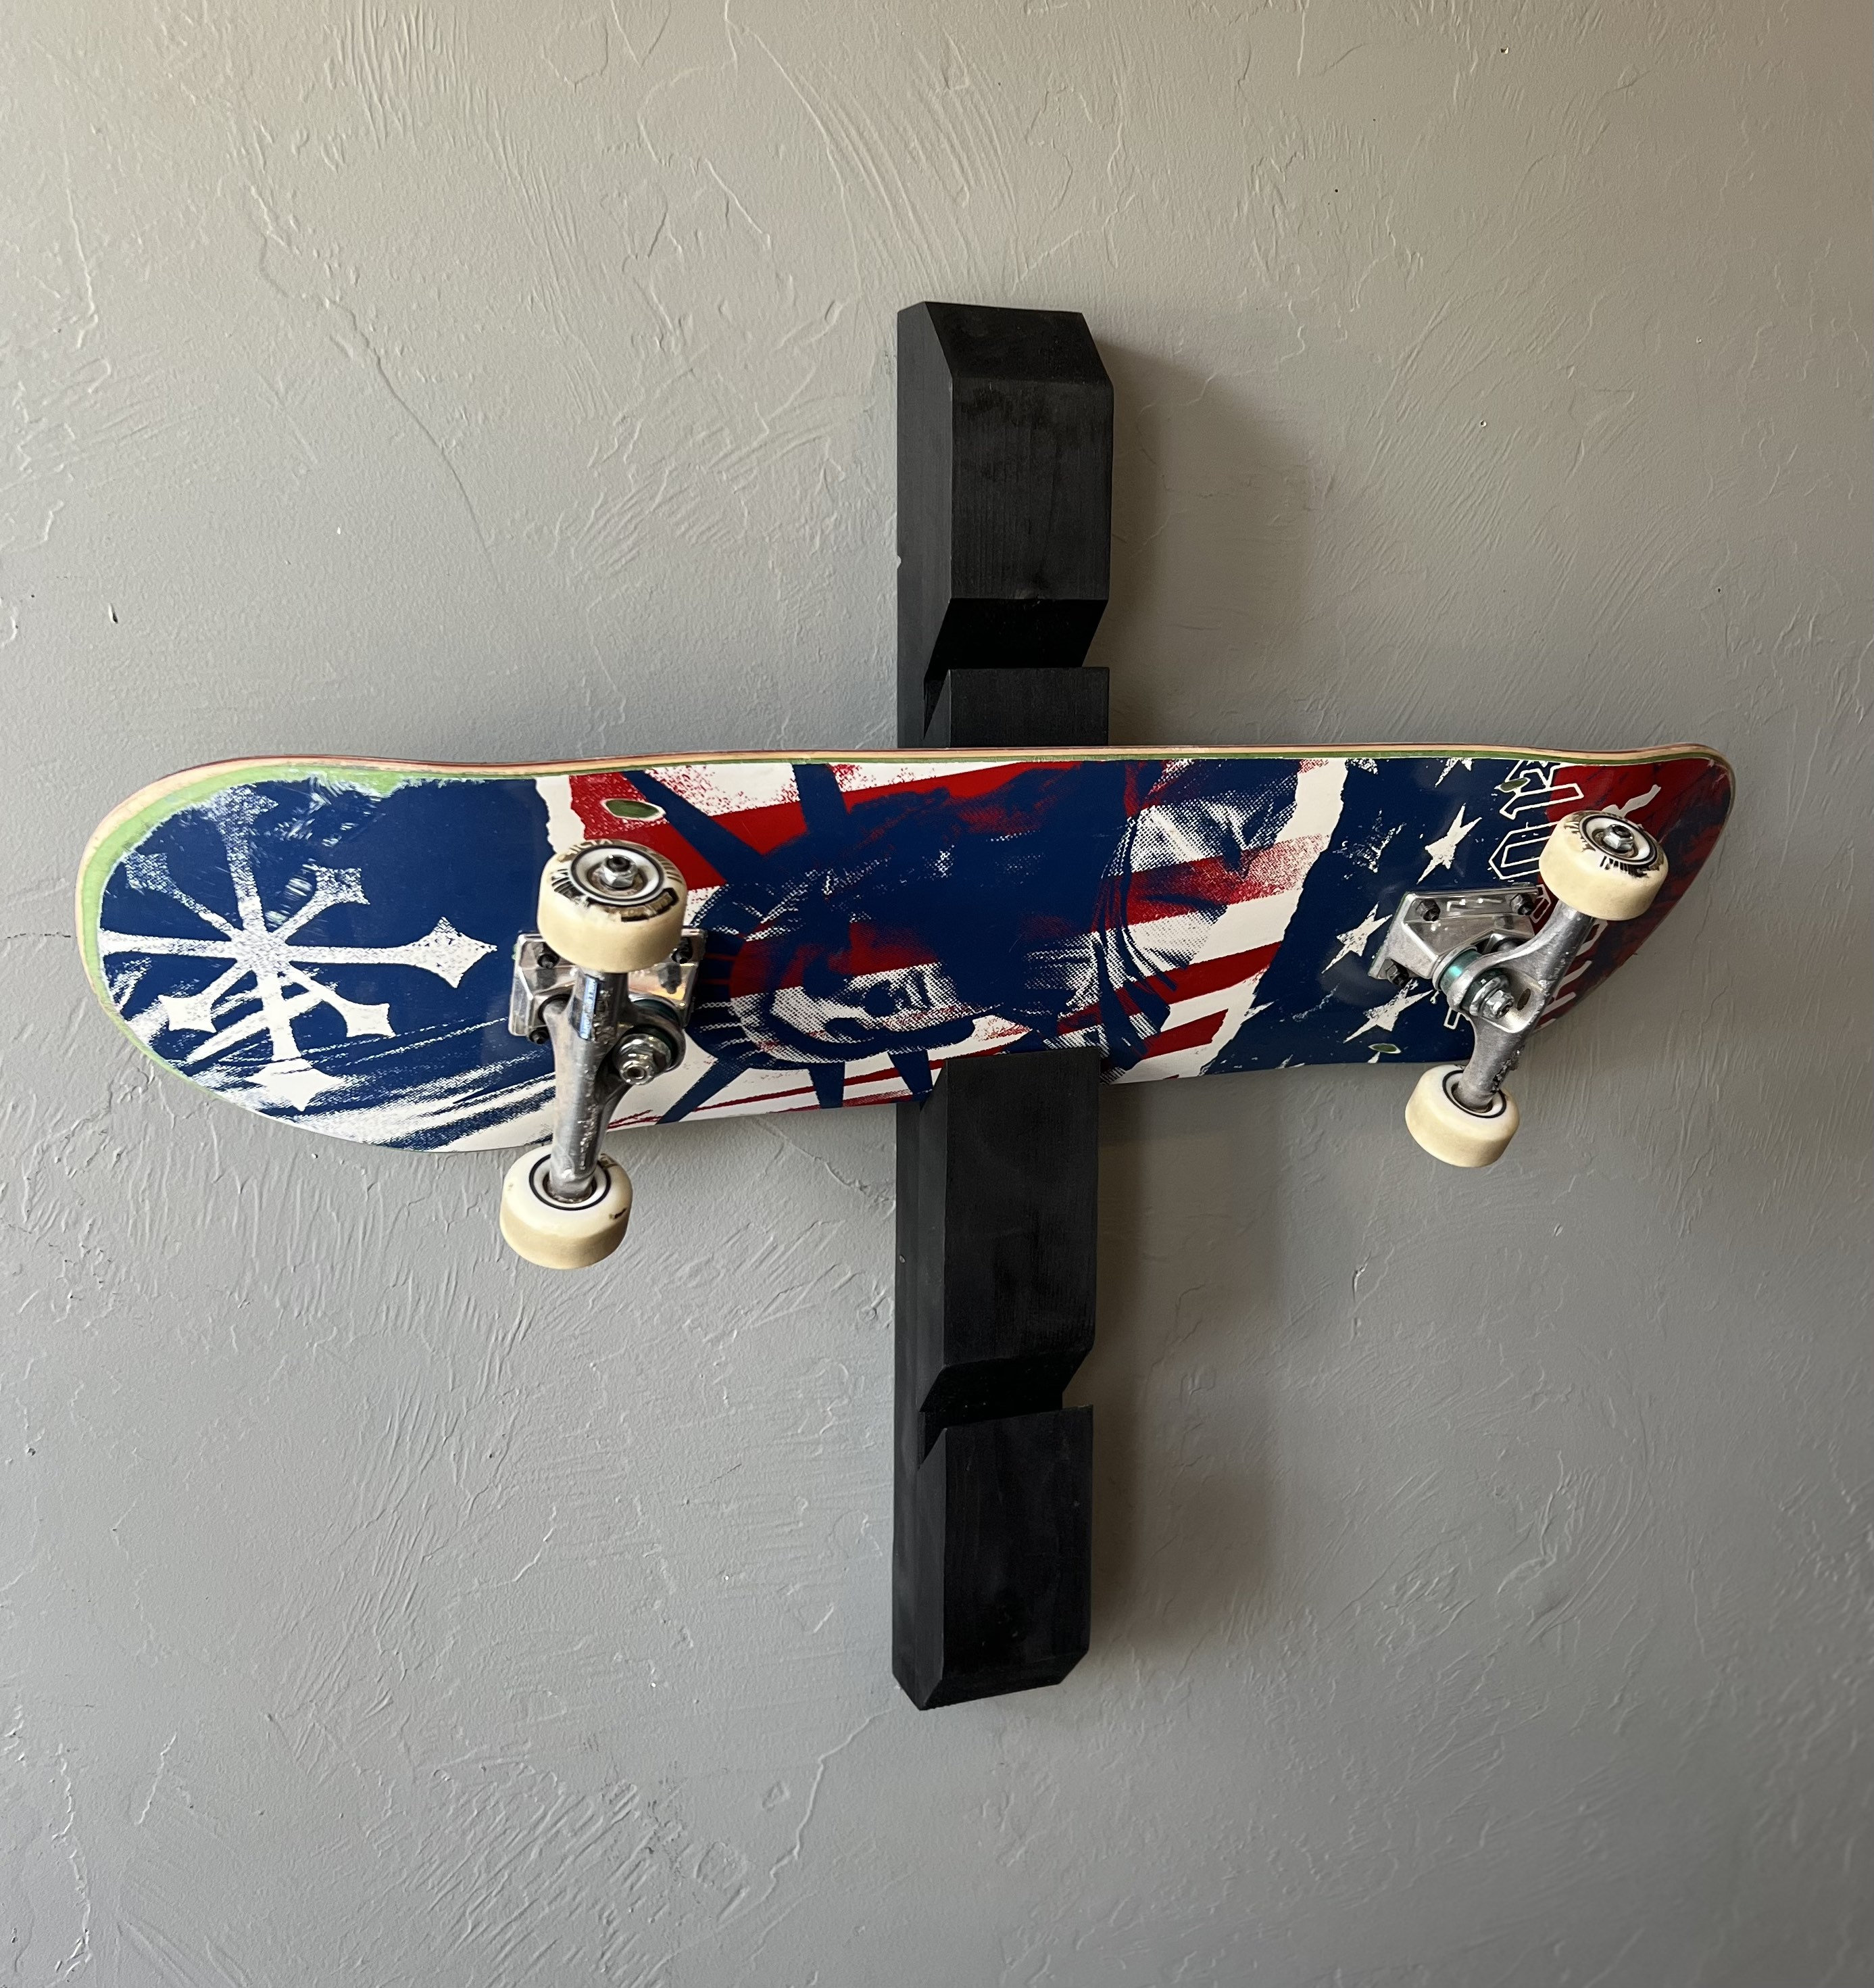 MIND&ACTION Skateboard Wall Mount Rack Board Display Wall Holder,Adjustable Storage Layers Space Saving Design,Versatile Wall Rack for Longboards Scooters Snowboards Skis 